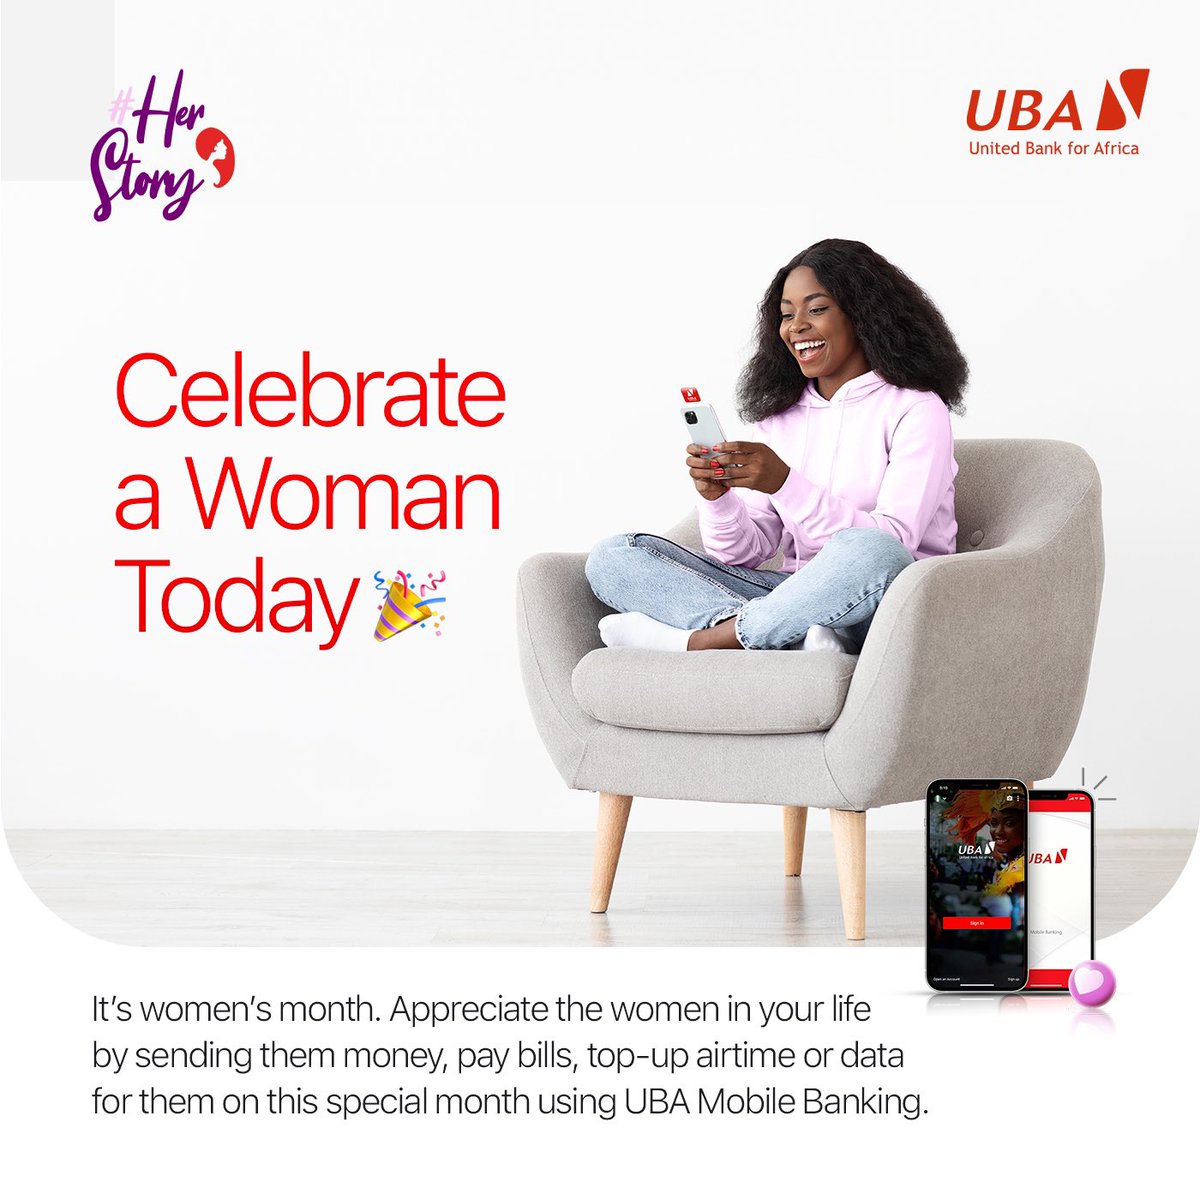 It's women's month, and what better way to show your appreciation than by treating the women in your life right. 🚺 Explore the UBA Mobile App to send them money, pay their bills, or top up airtime and data. Let's make this month extra special for the amazing women in our lives.…